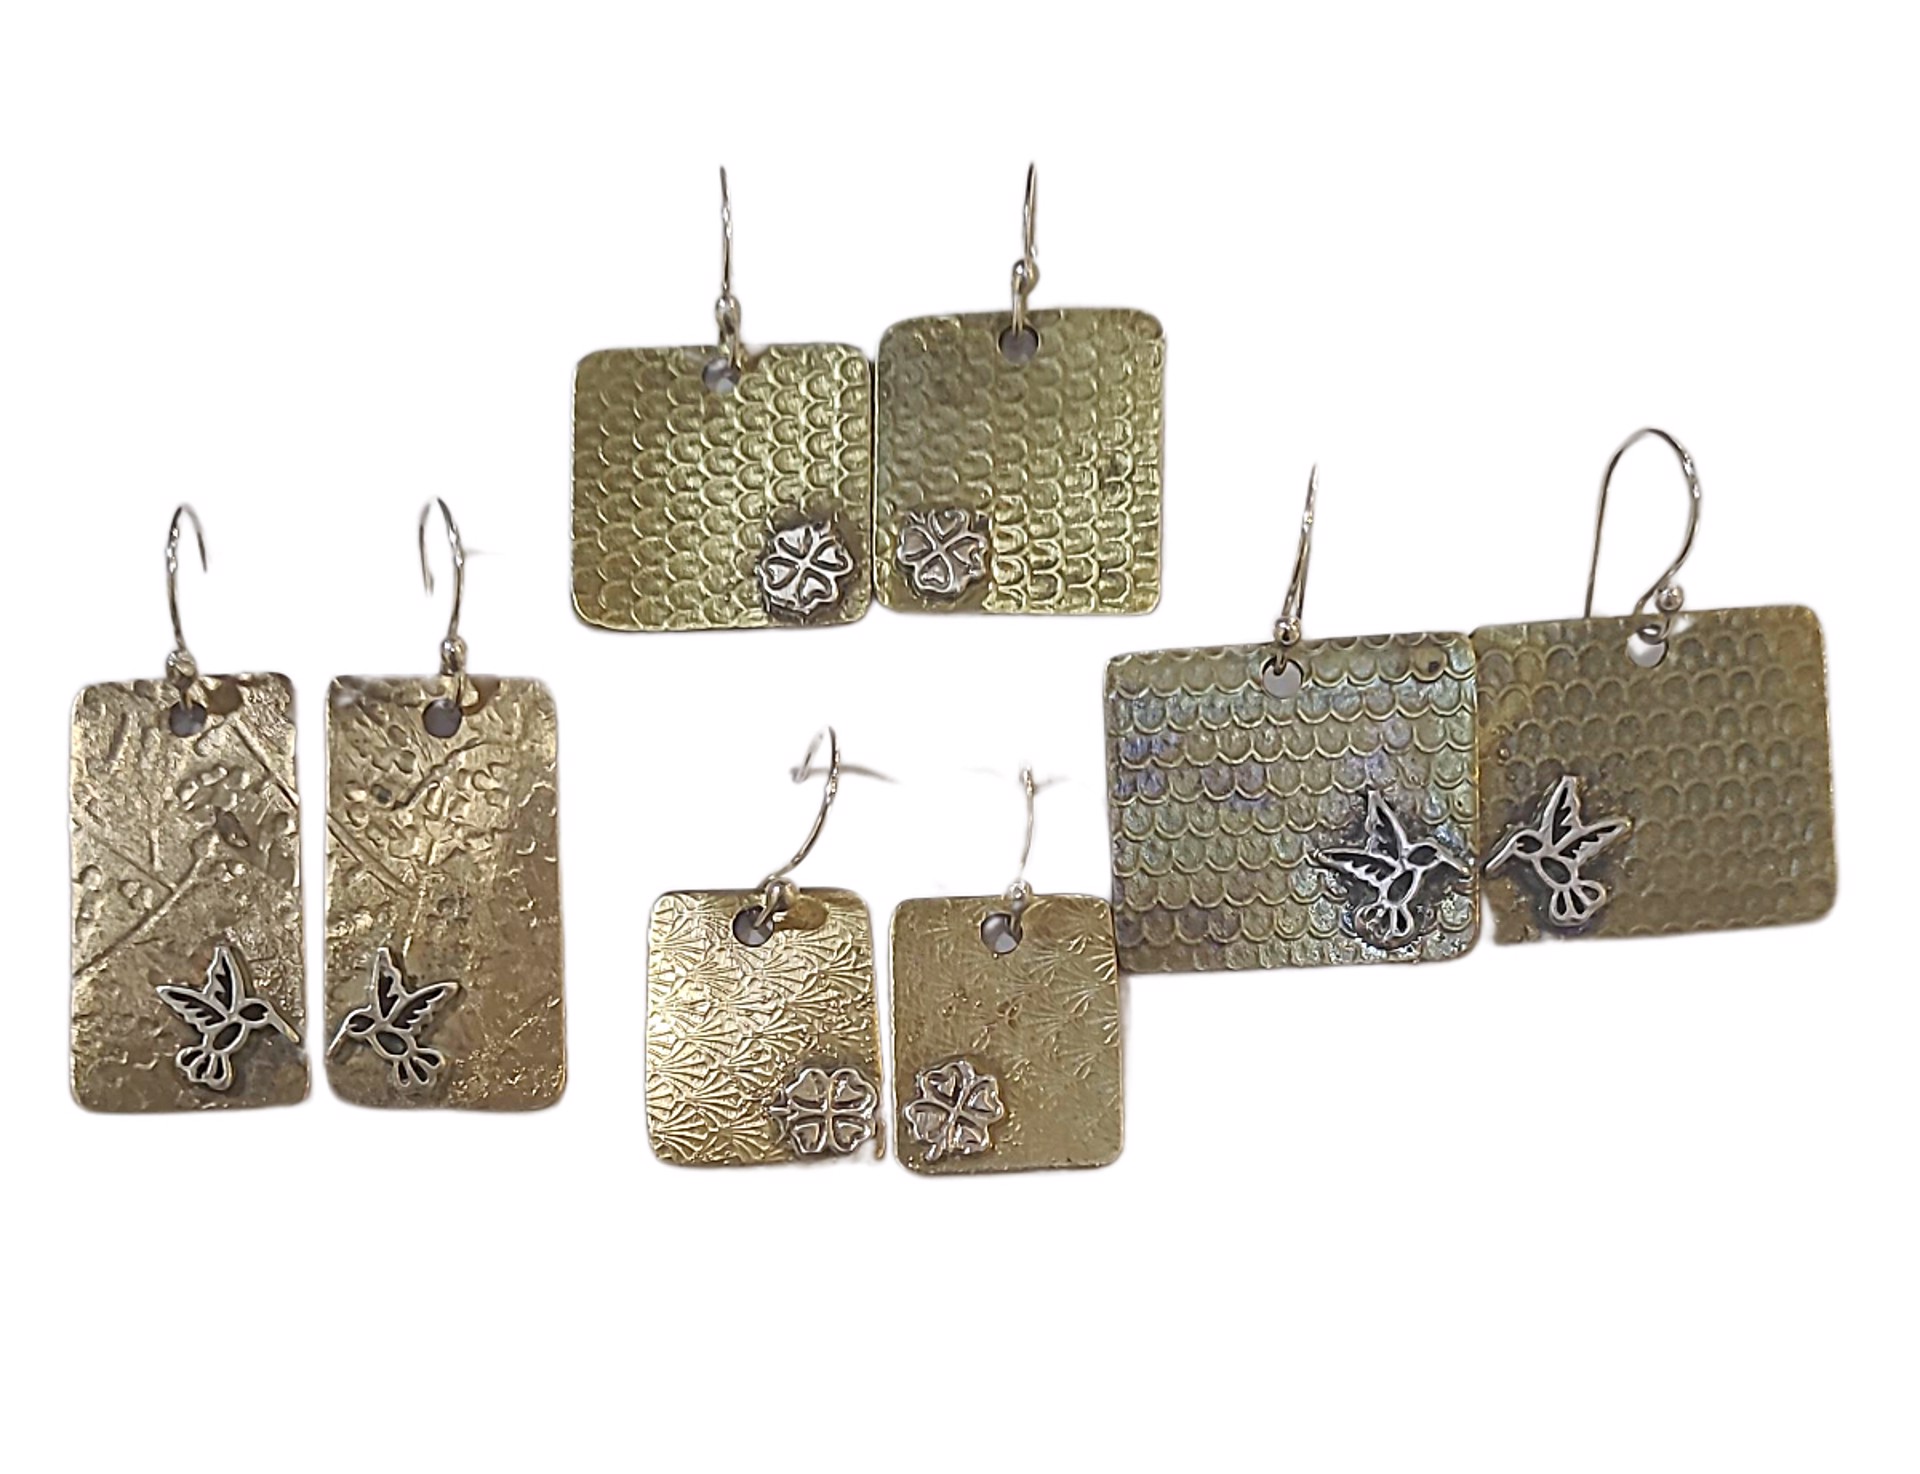 Earrings - Brass with Assorted Designs by Pattie Parkhurst